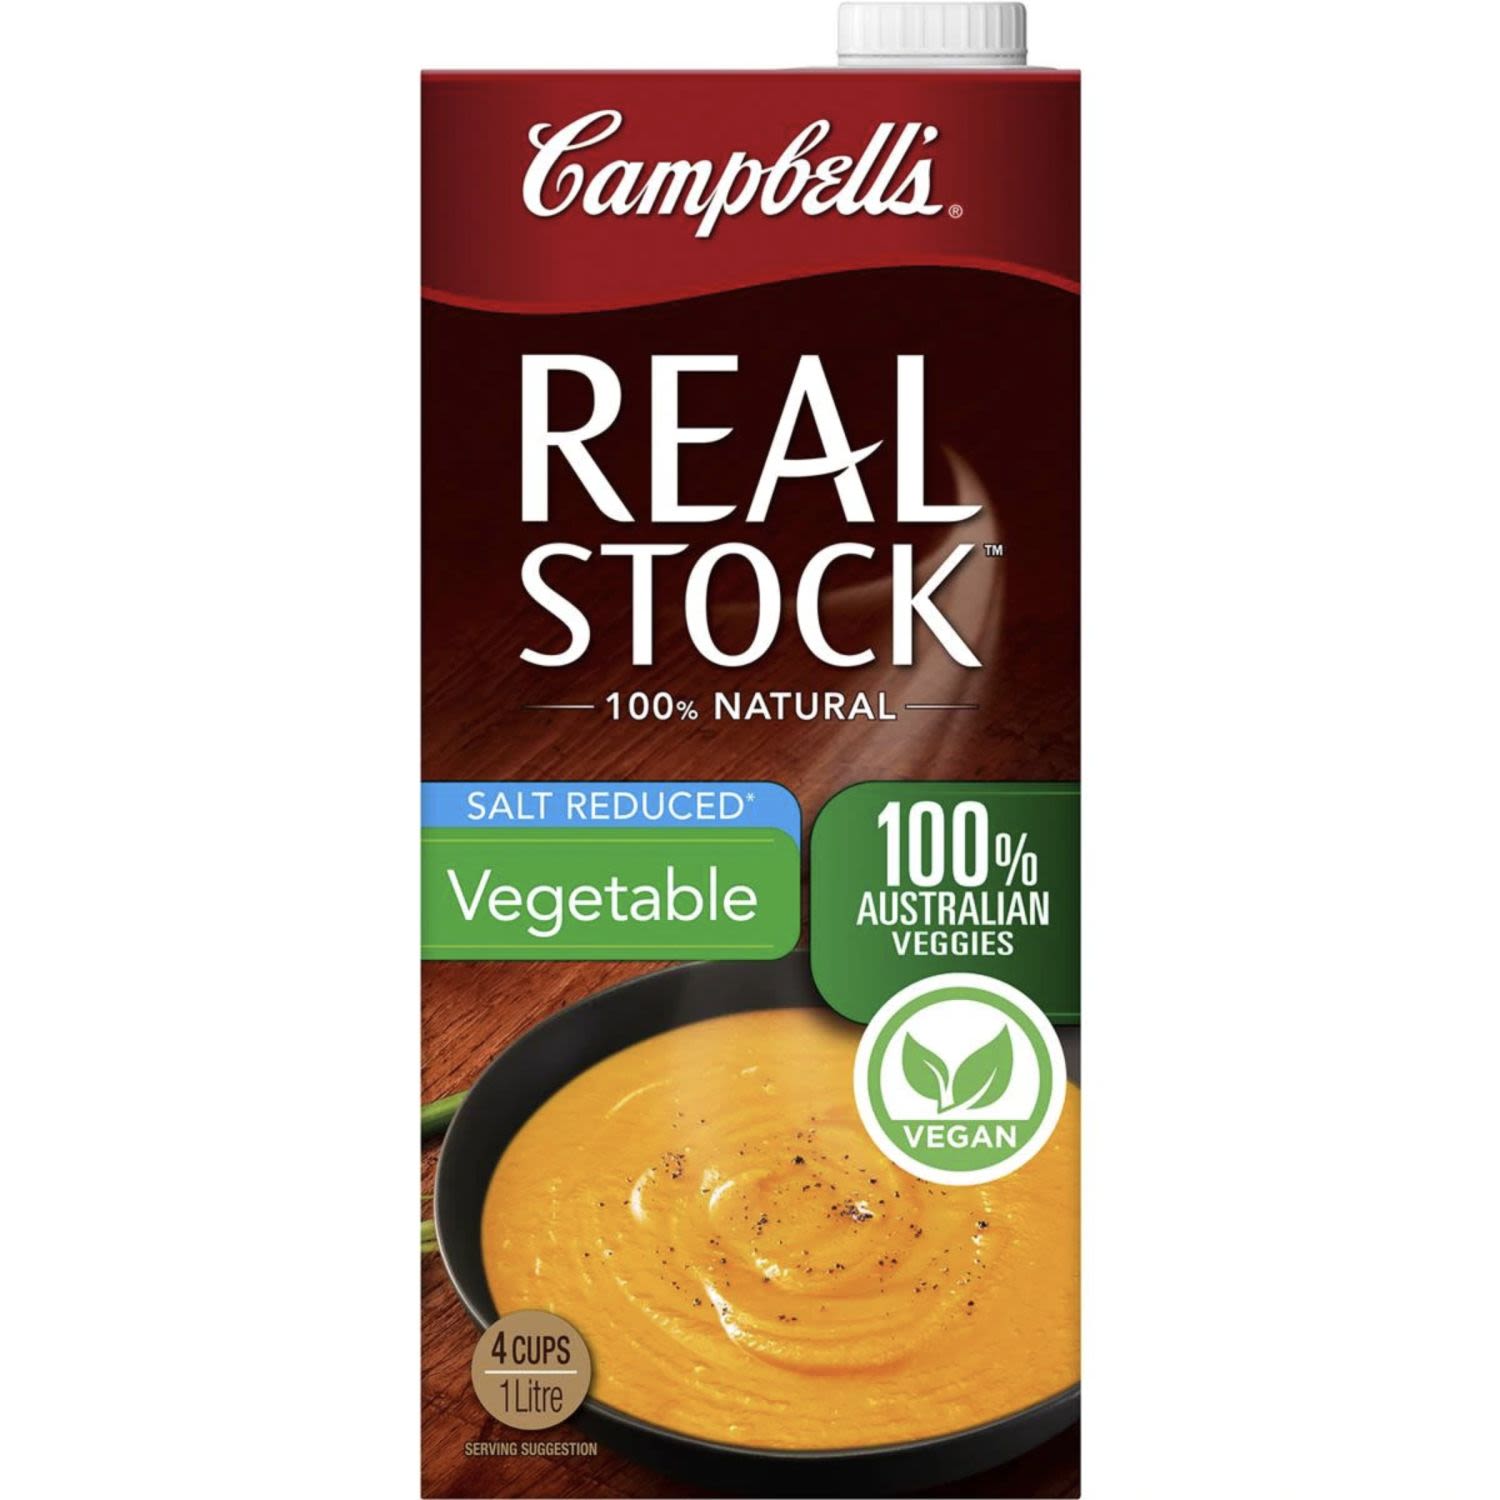 Campbell's Real Vegetable Liquid Stock Salt Reduced, 1 Litre